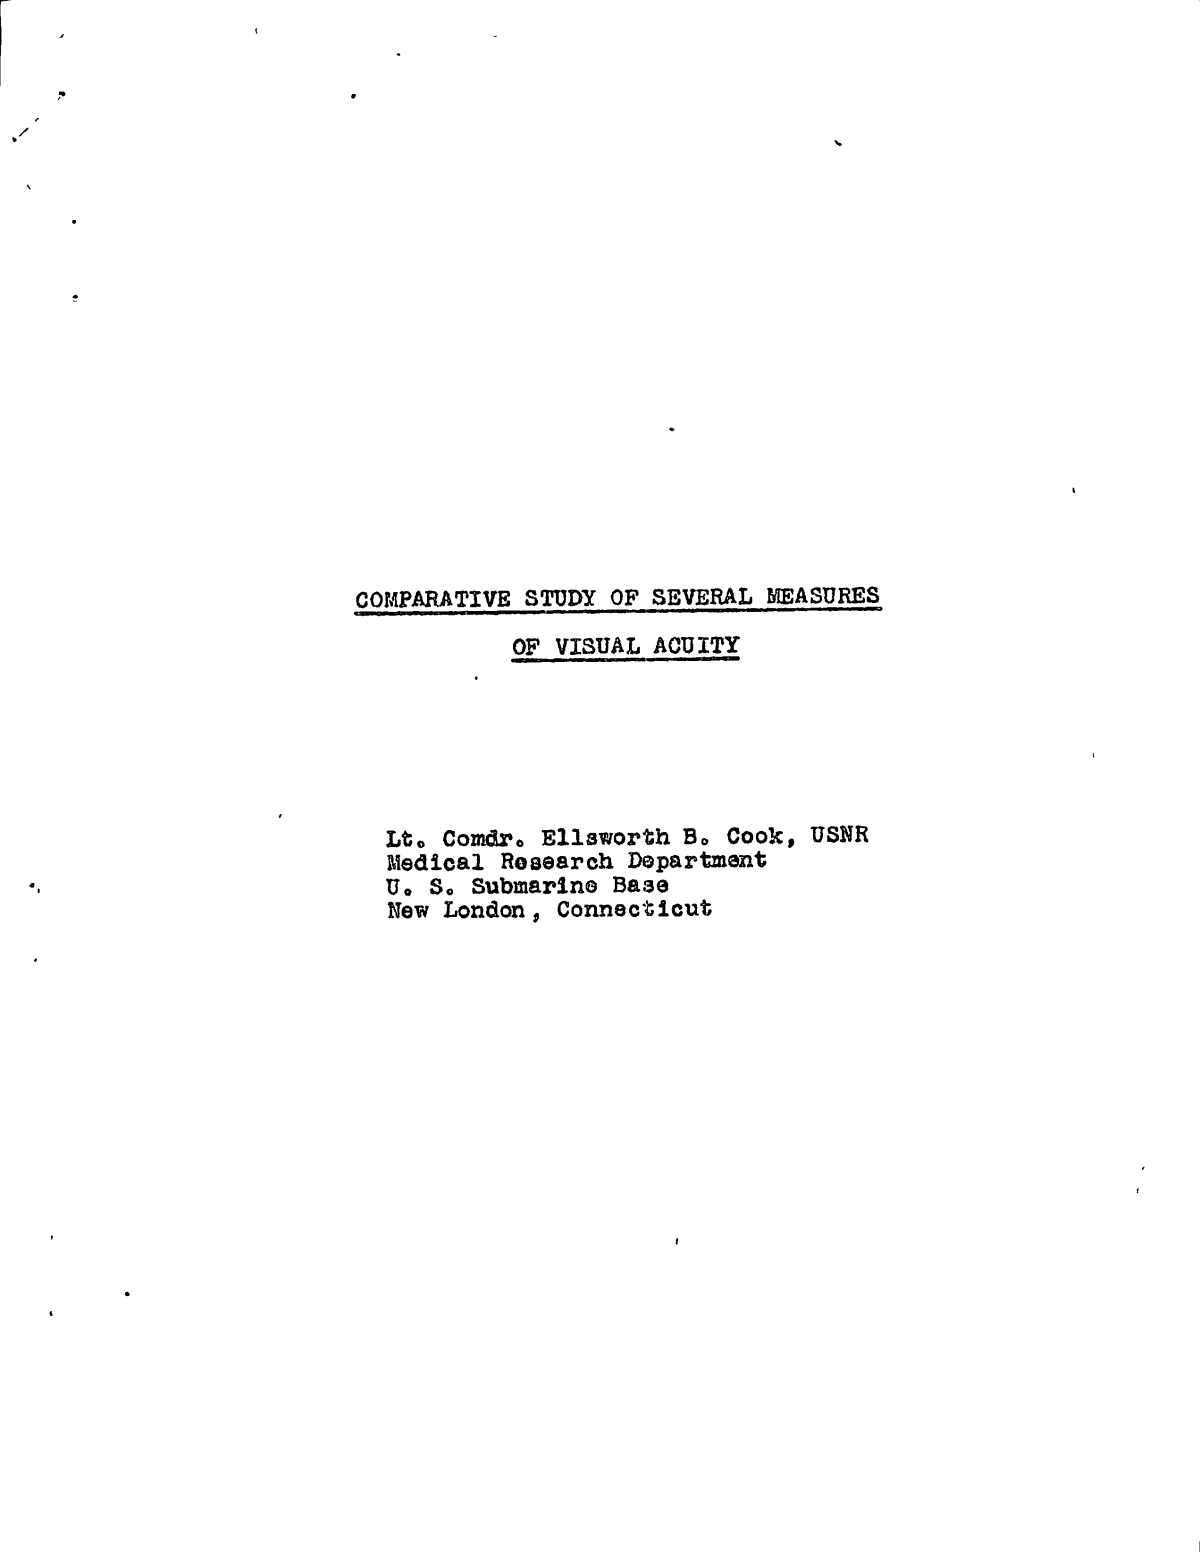 Minutes and Proceedings Army Navy Nrc Vision Committee d, Minutes and  proceedings of the fifteenth meeting of the Army-Navy-NRC Vision Committee:  12-13 February, 1946, National Academy of Sciences, Washington, D.C.